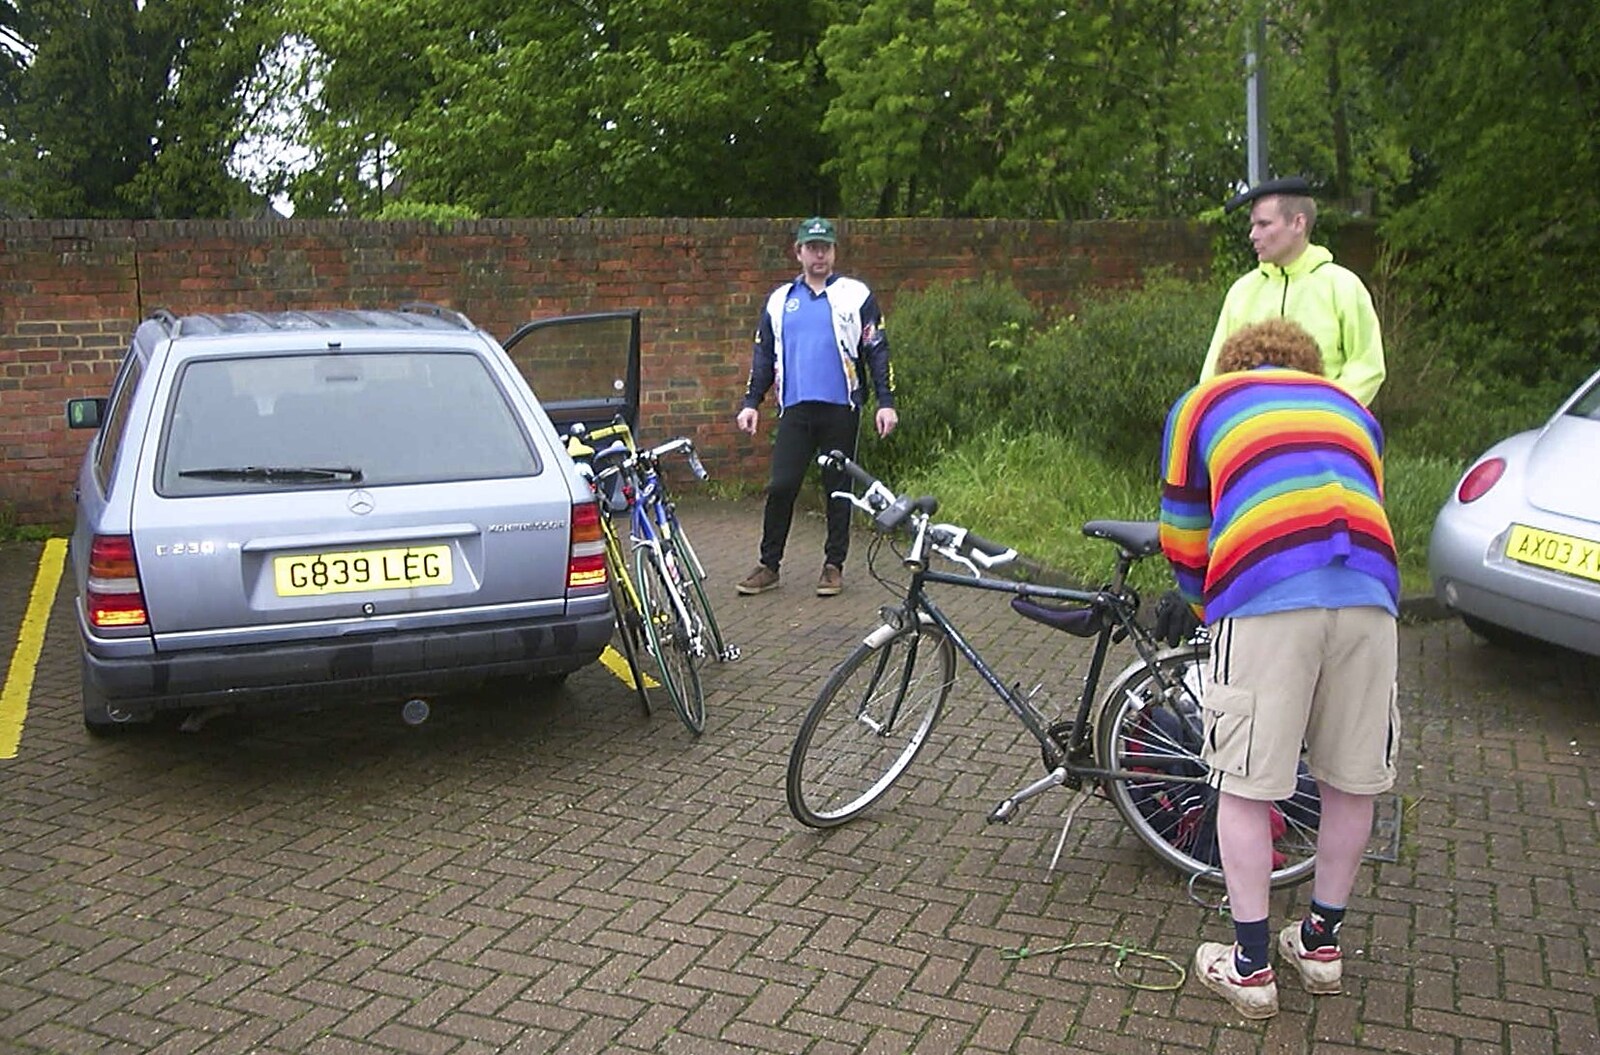 The BSCC Annual Bike Ride, Lenham, Kent - 8th May 2004: Next morning, we gets the bikes ready